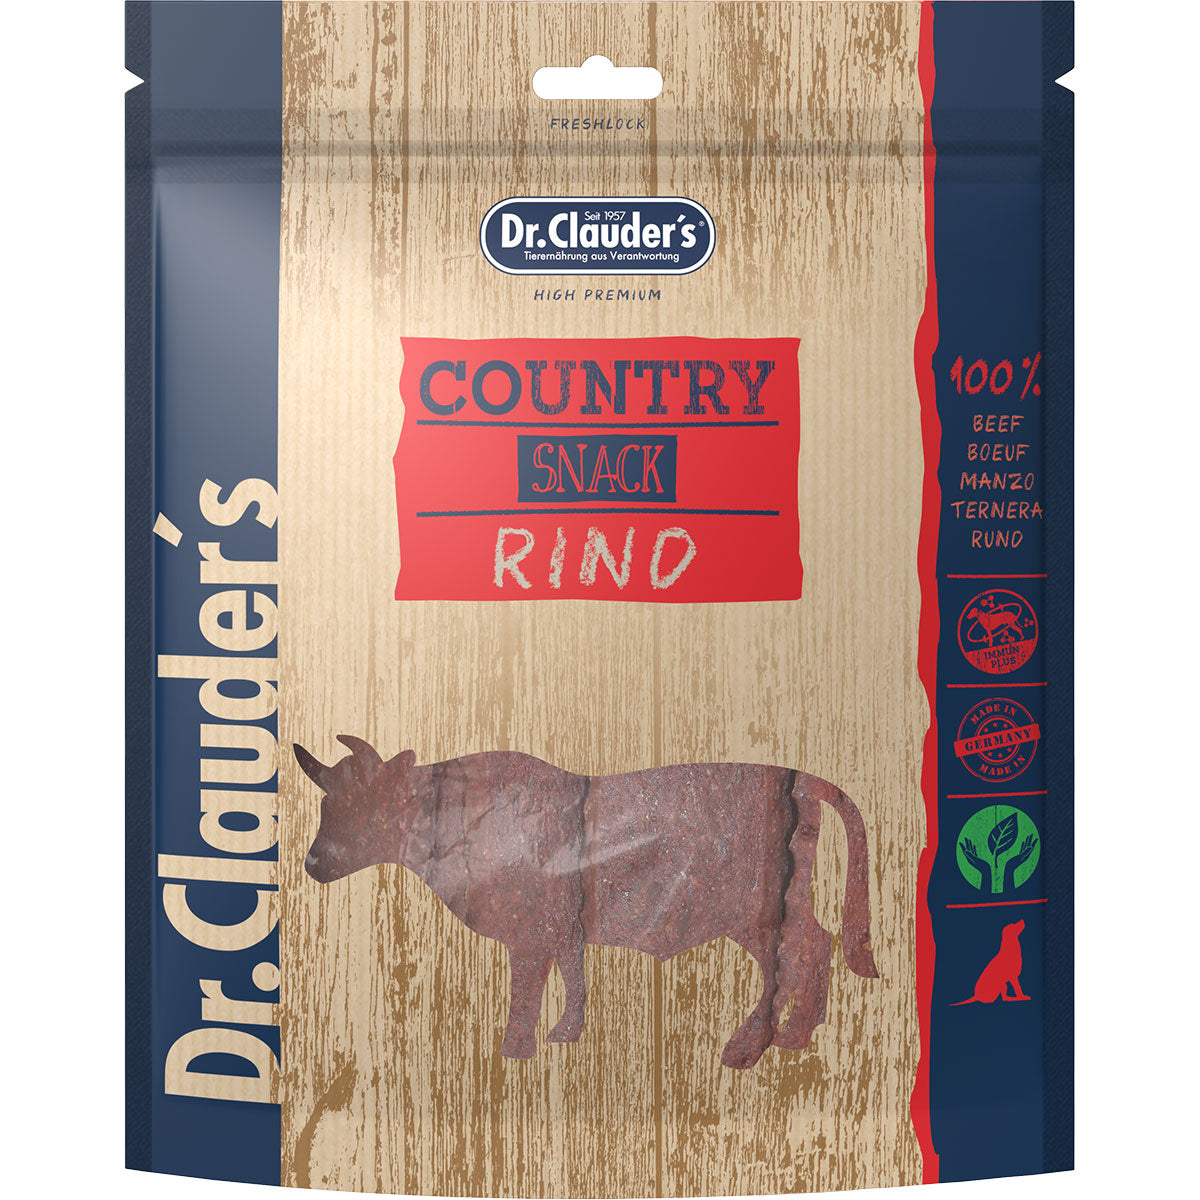 Dr. Clauders Snack Country Rind, 170g